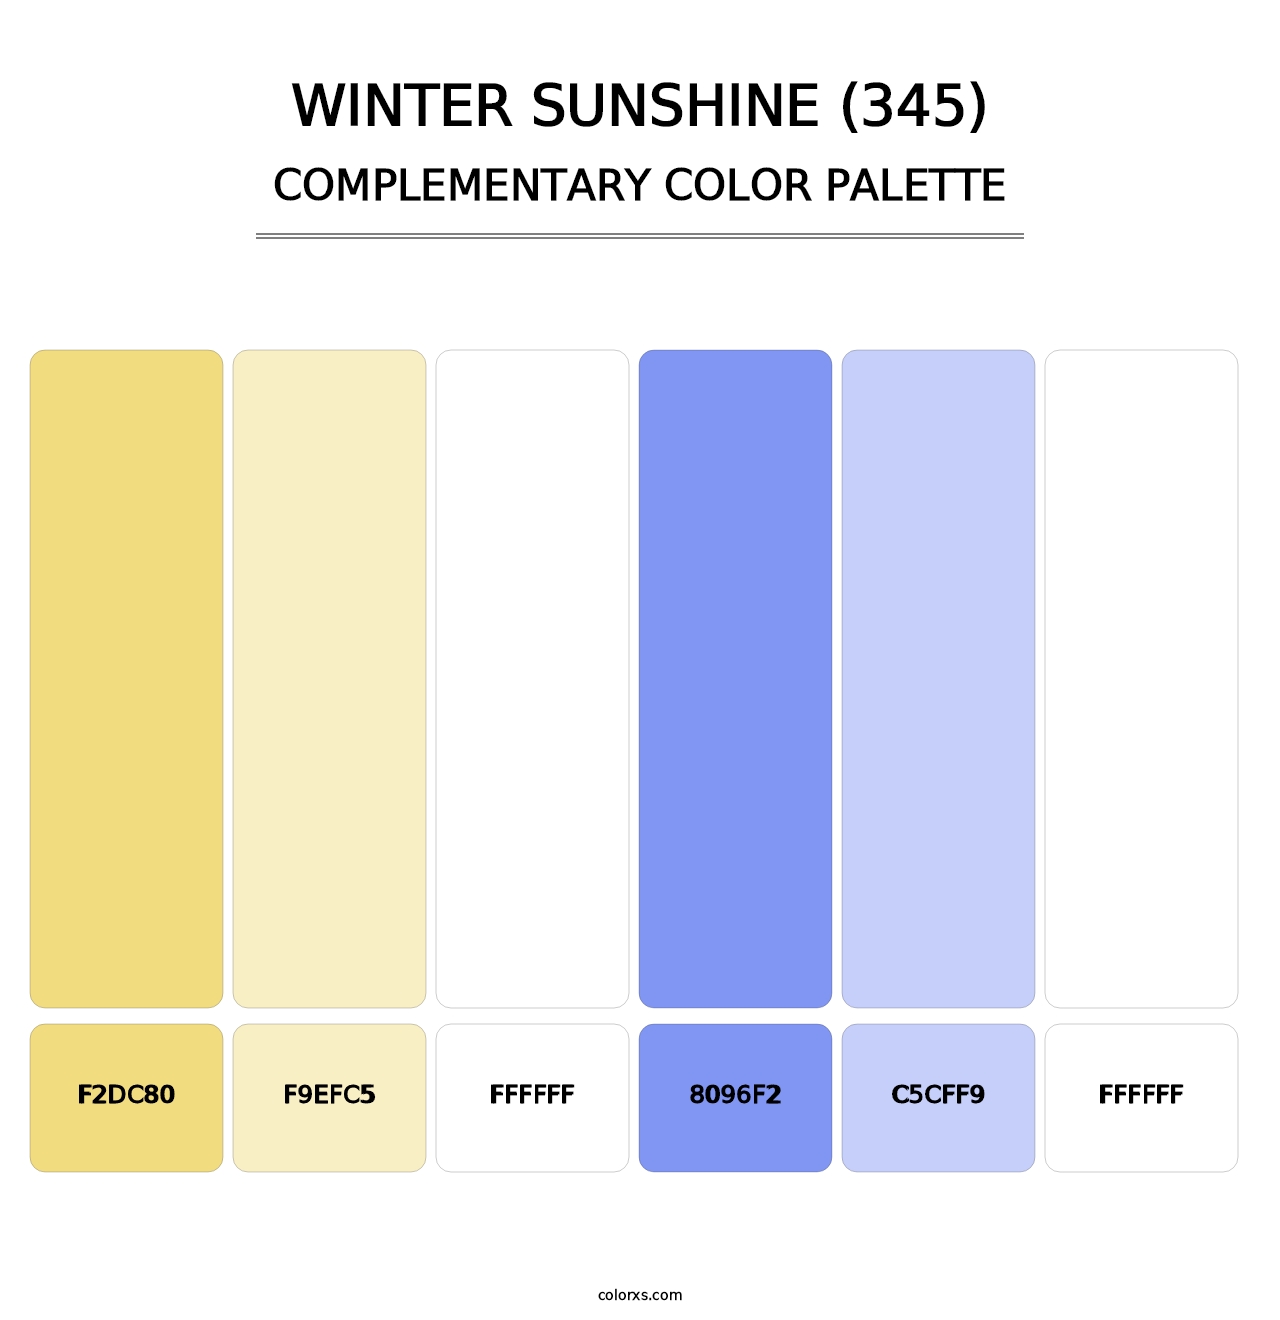 Winter Sunshine (345) - Complementary Color Palette